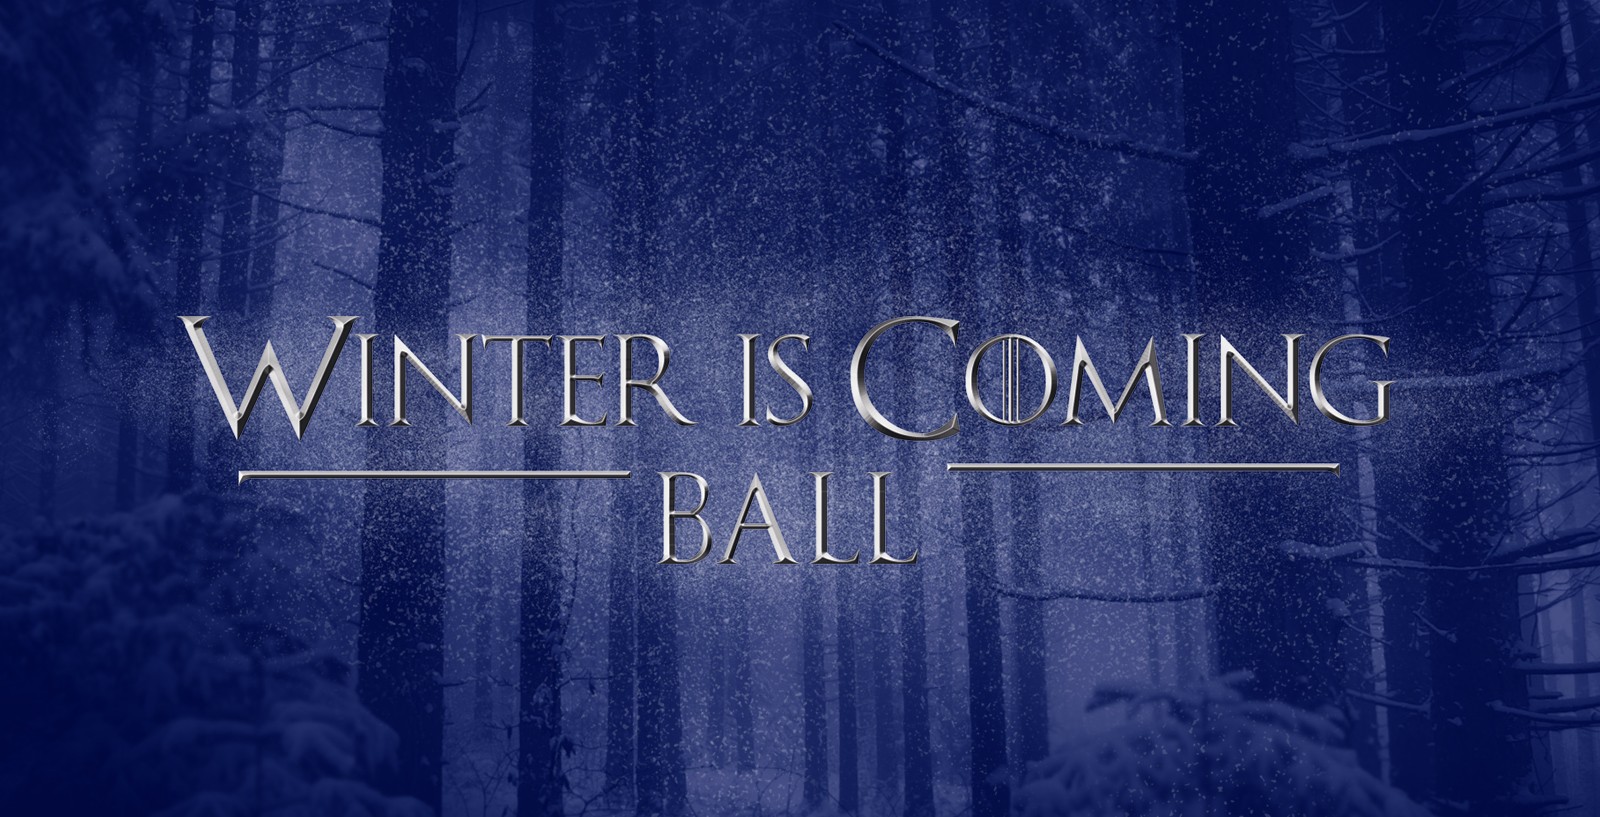 ANNULÉ - Winter is Coming Ball